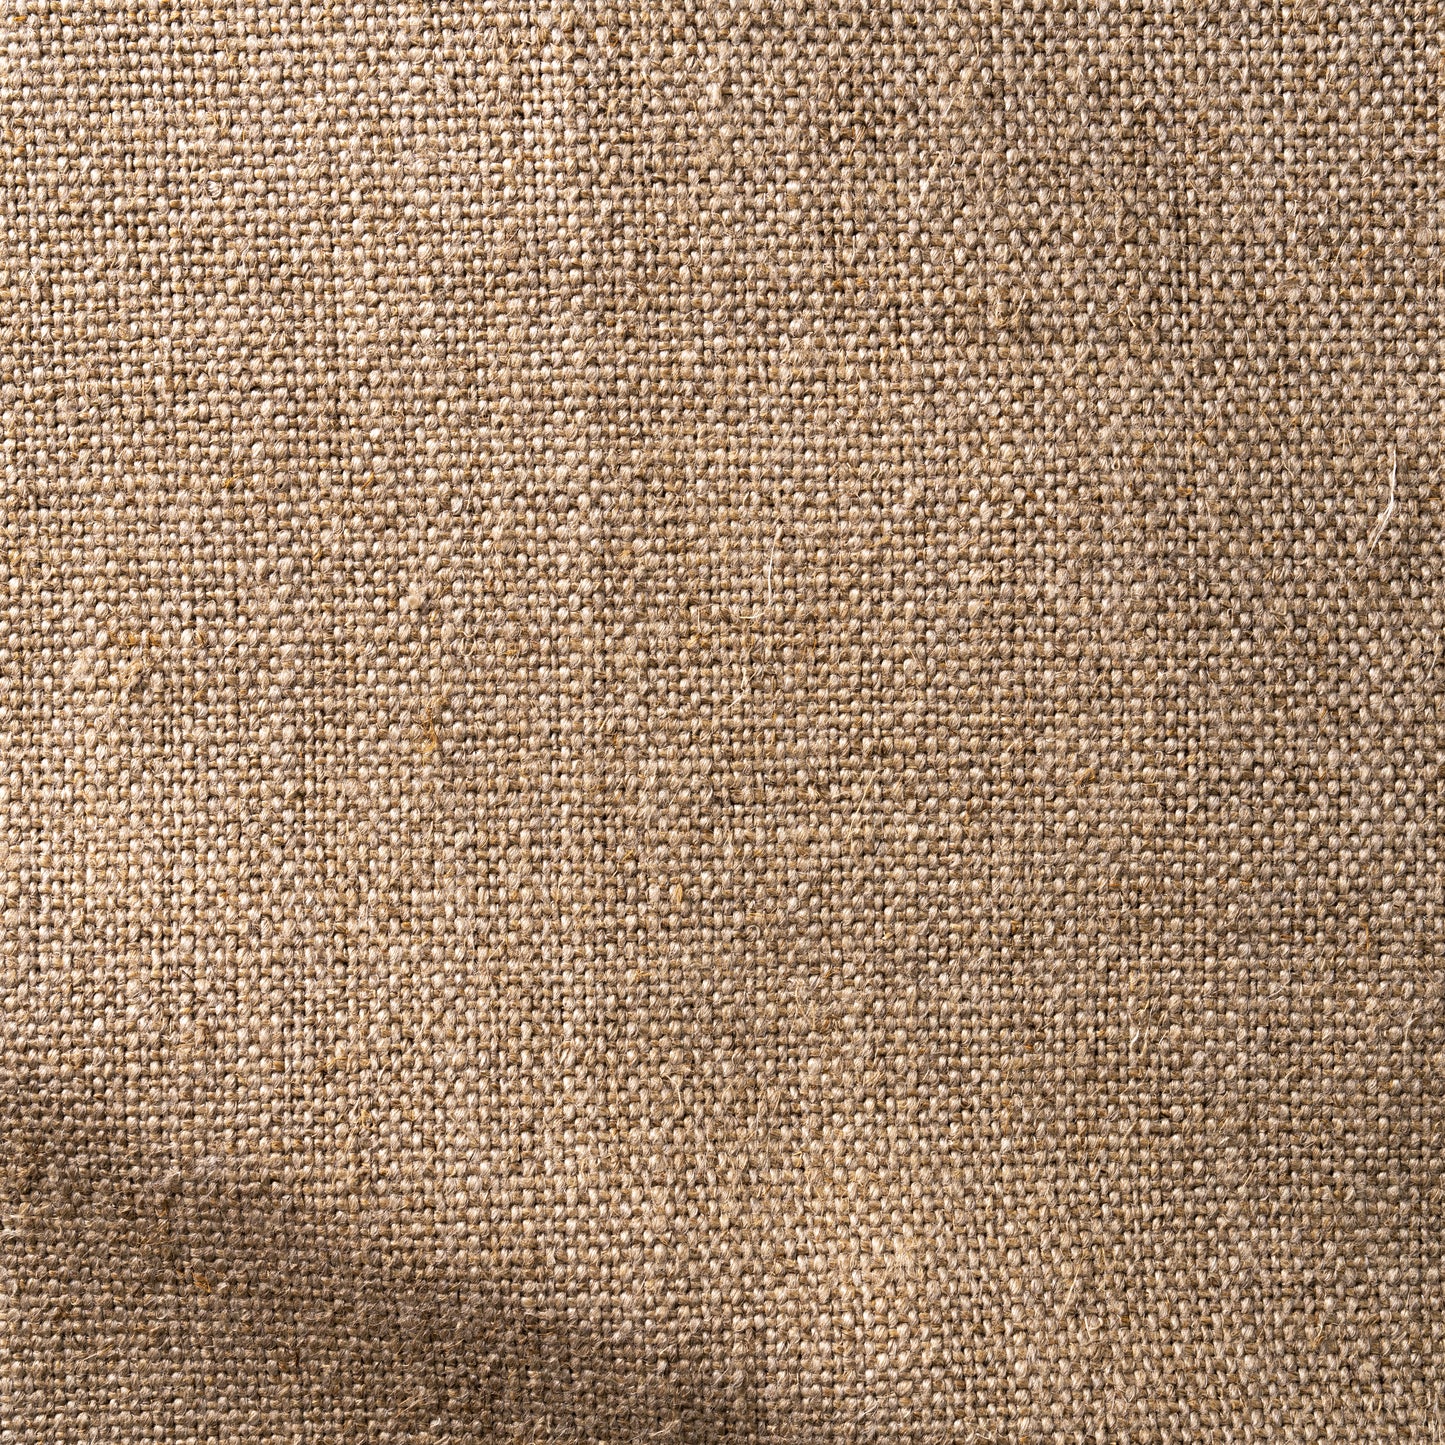 Upholstery Weight 100% Linen (12.5 oz/square yard) in Burlap Cool